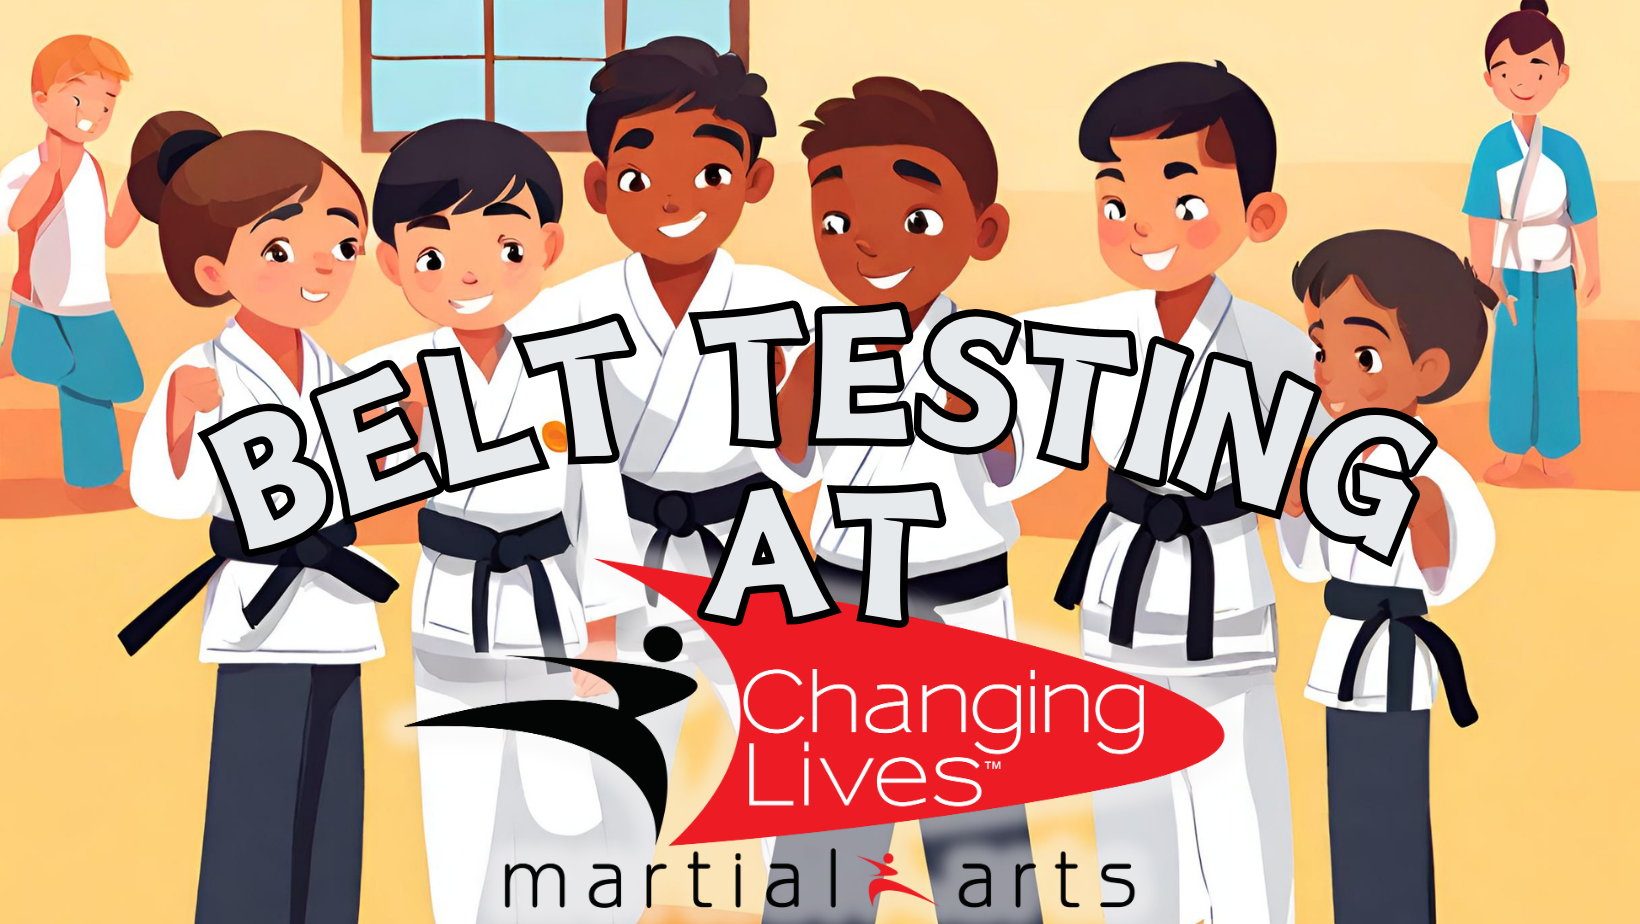 Group of students at belt testing